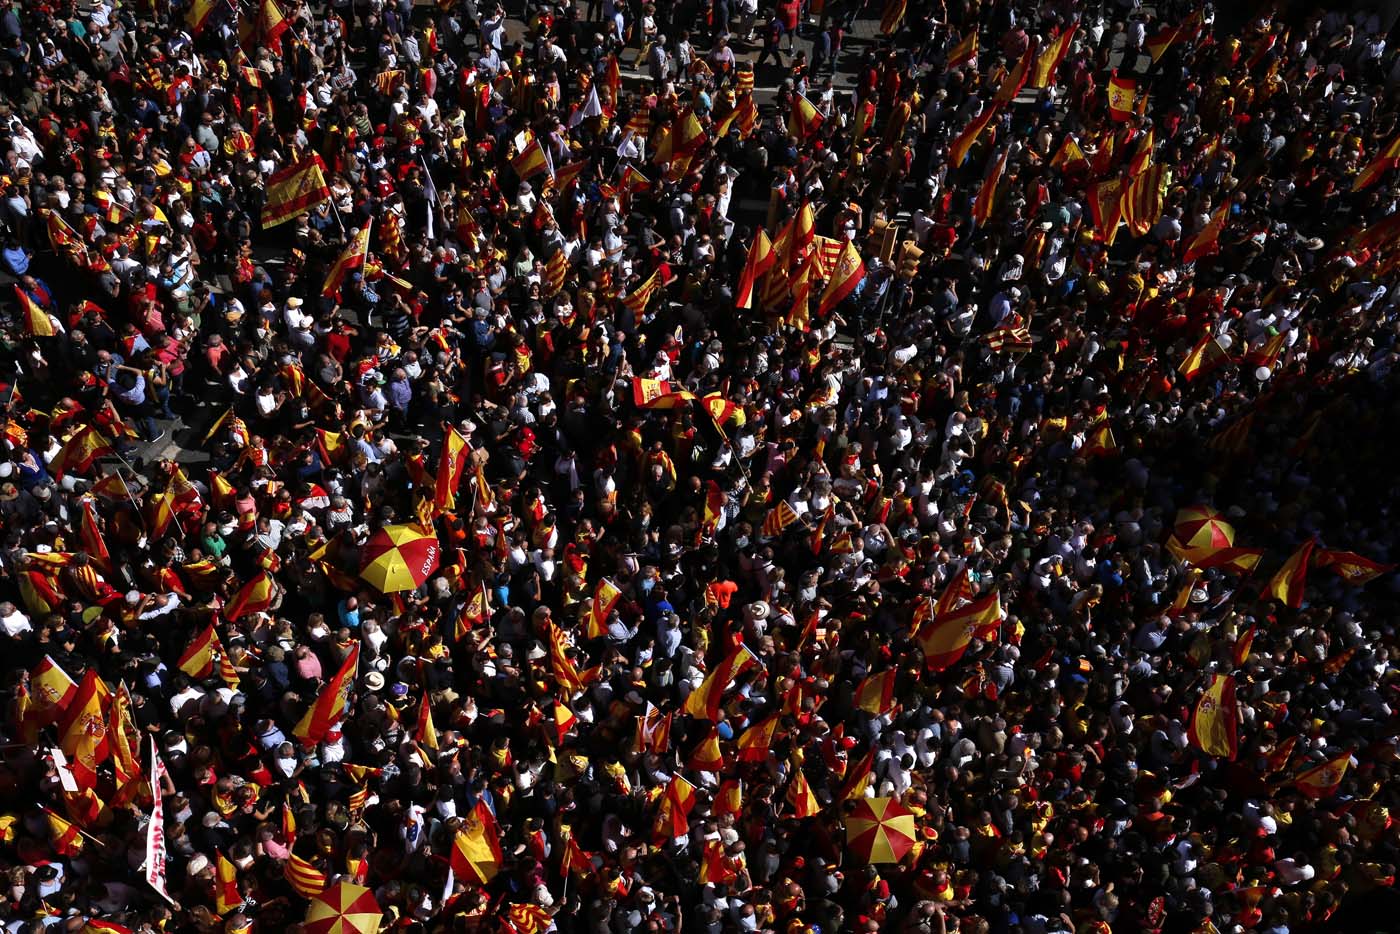 Protesters hold Spanish and Catalan flags during a demonstration called by "Societat Civil Catalana" (Catalan Civil Society) to support the unity of Spain on October 8, 2017 in Barcelona. Spain braced for more protests despite tentative signs that the sides may be seeking to defuse the crisis after Madrid offered a first apology to Catalans injured by police during their outlawed independence vote. / AFP PHOTO / PAU BARRENA